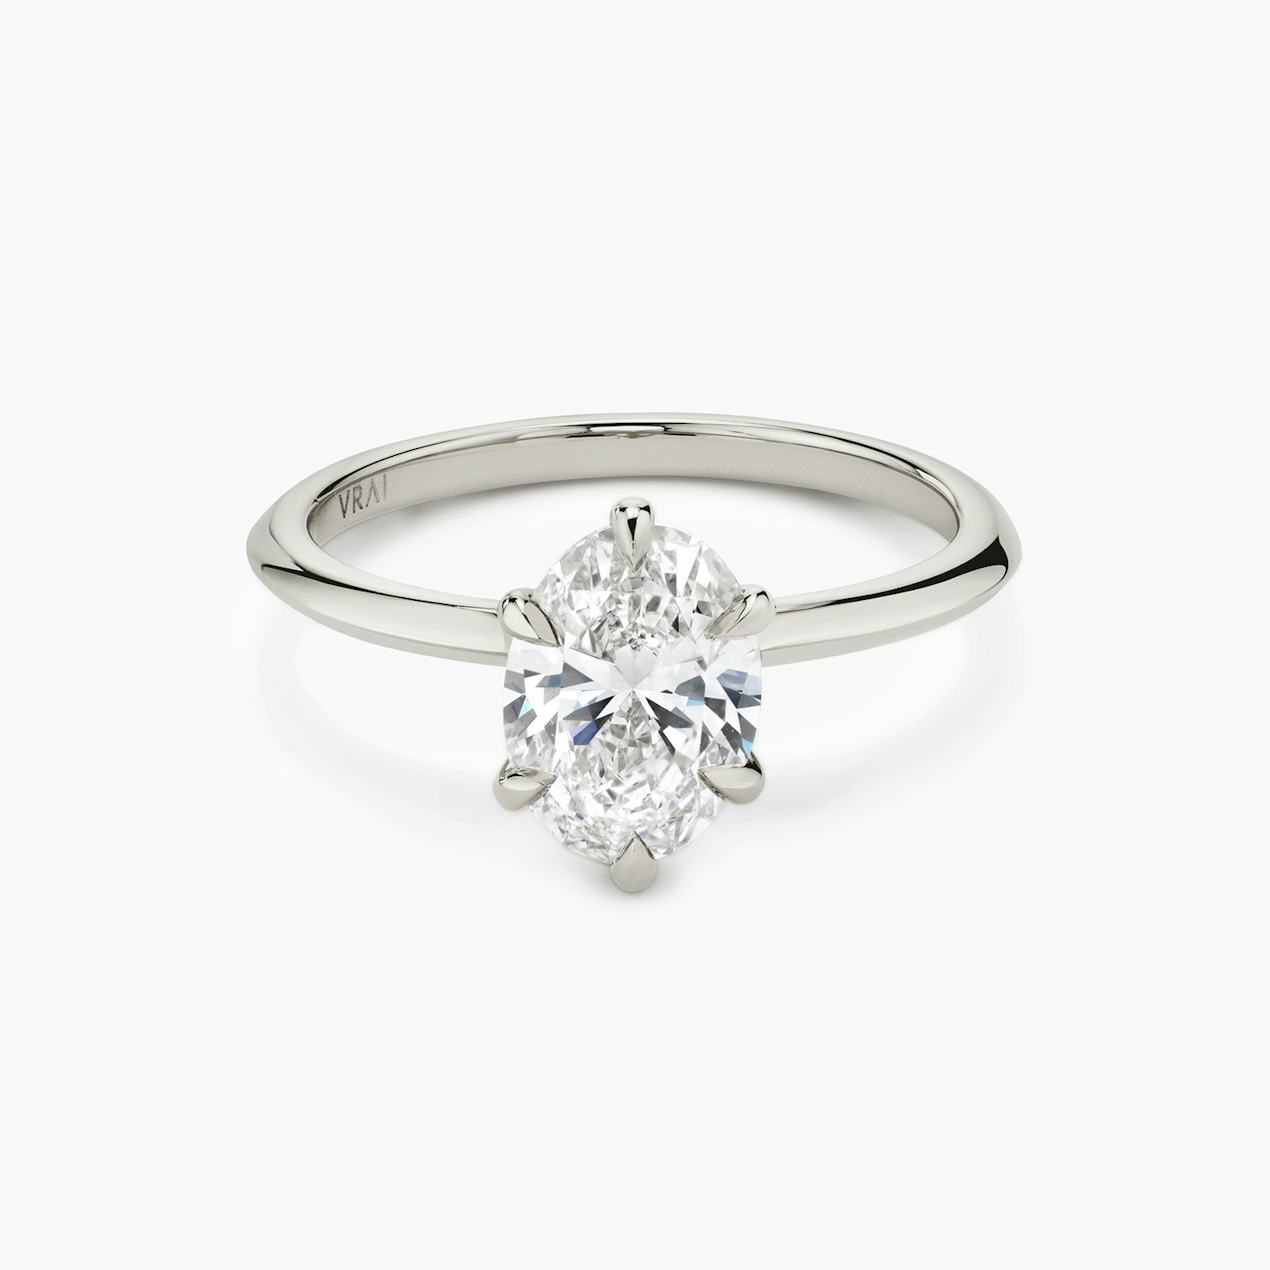 5. The Knife Edge Engagement Ring 